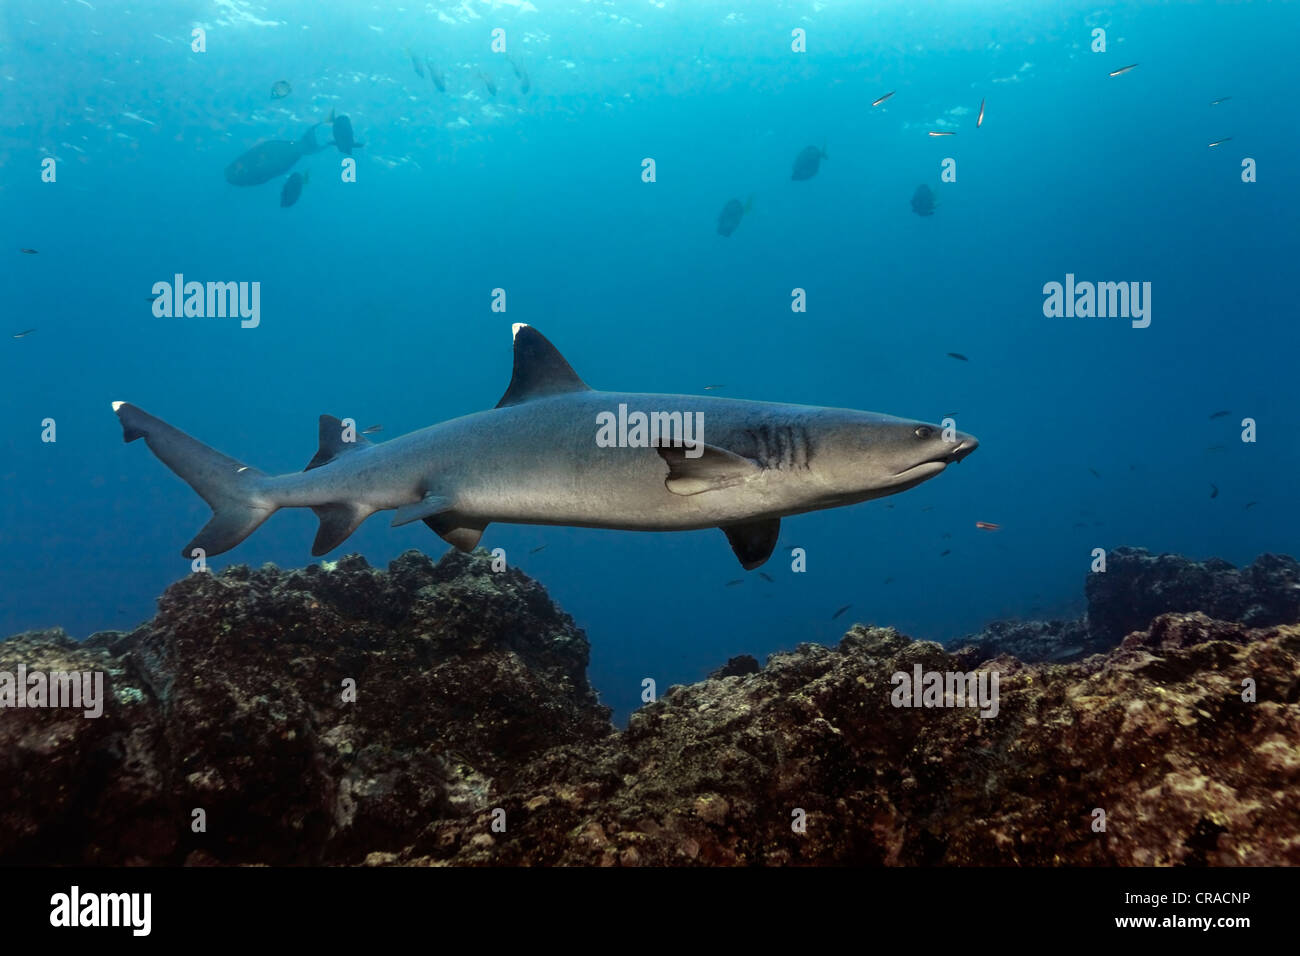 White-Tipped-Reef Shark (Triaenodon obesus) above reef, North Seymour Island, Galapagos Islands, Pacific Stock Photo